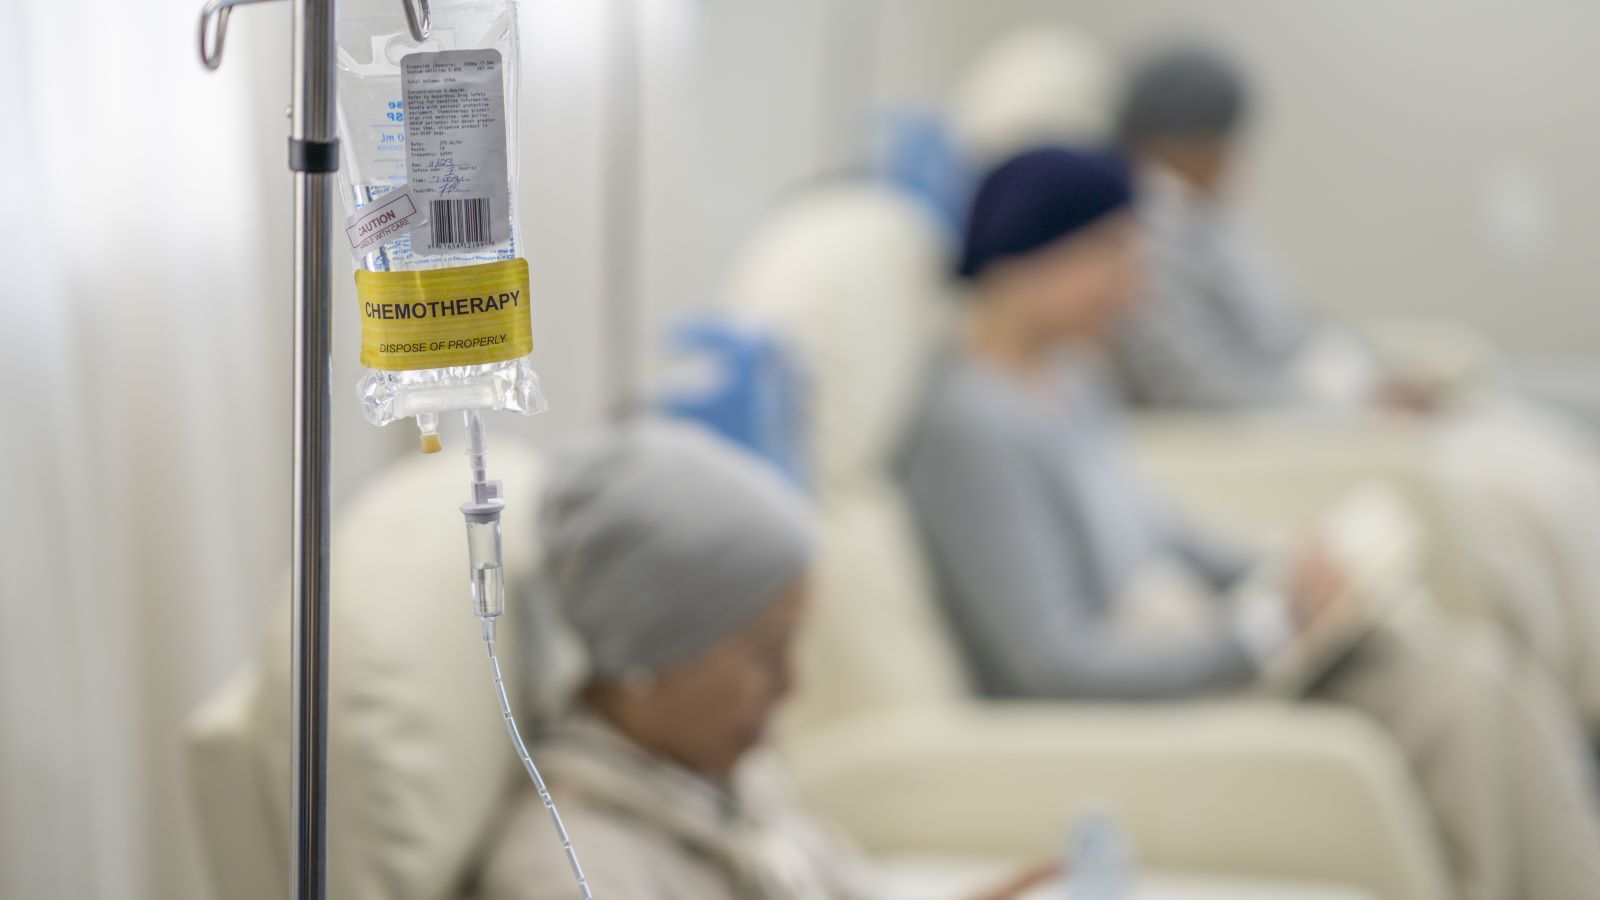 How Is Chemotherapy Prepared?